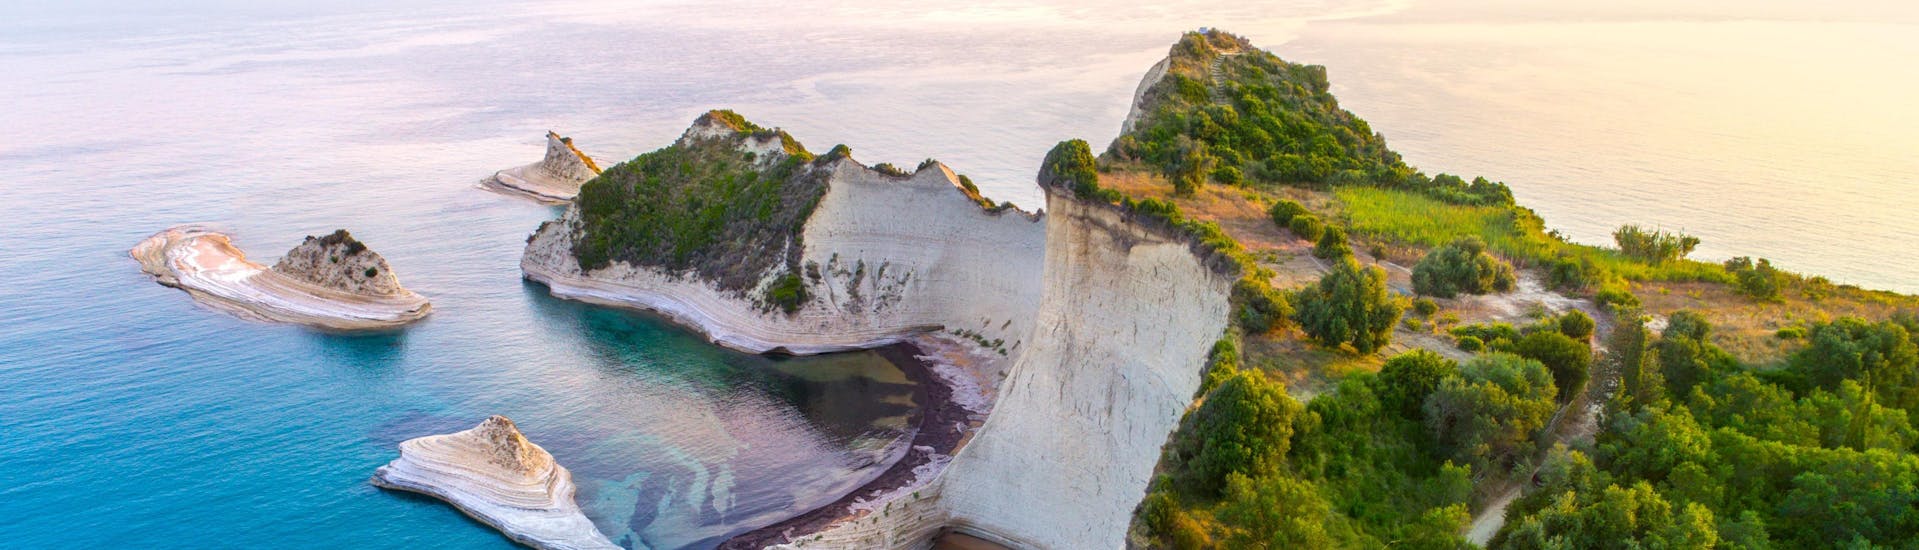 An image of beautiful Cape Drastis, one of the places one might visit on a boat trip in Corfu.